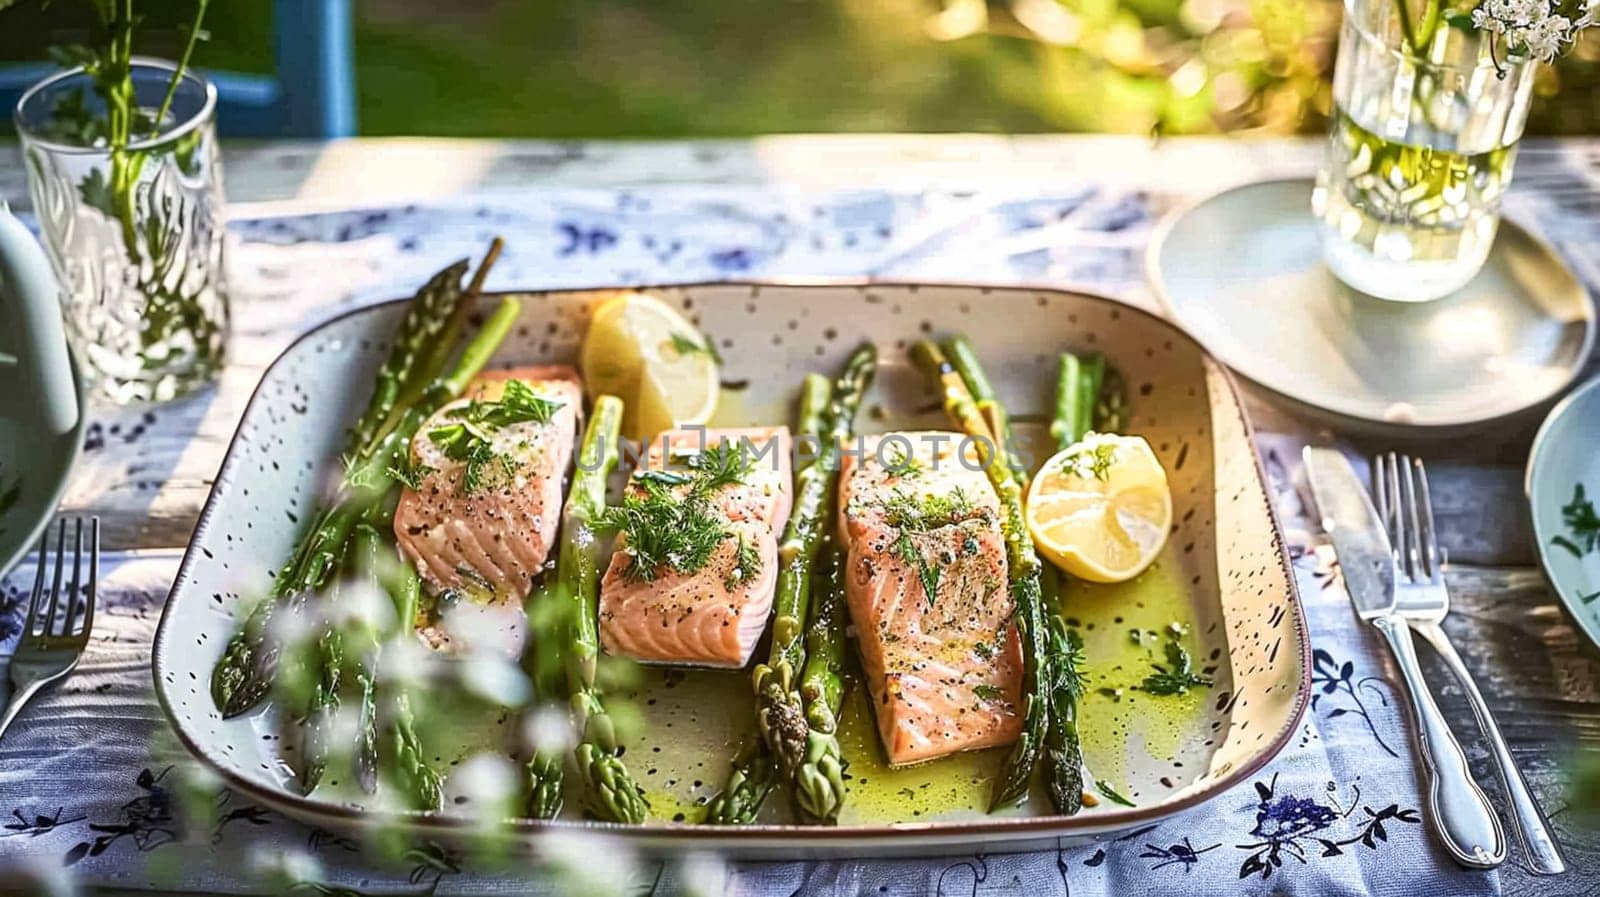 Salmon with asparagus, lemon and spice seasoning in the English countryside garden, homemade recipe by Anneleven